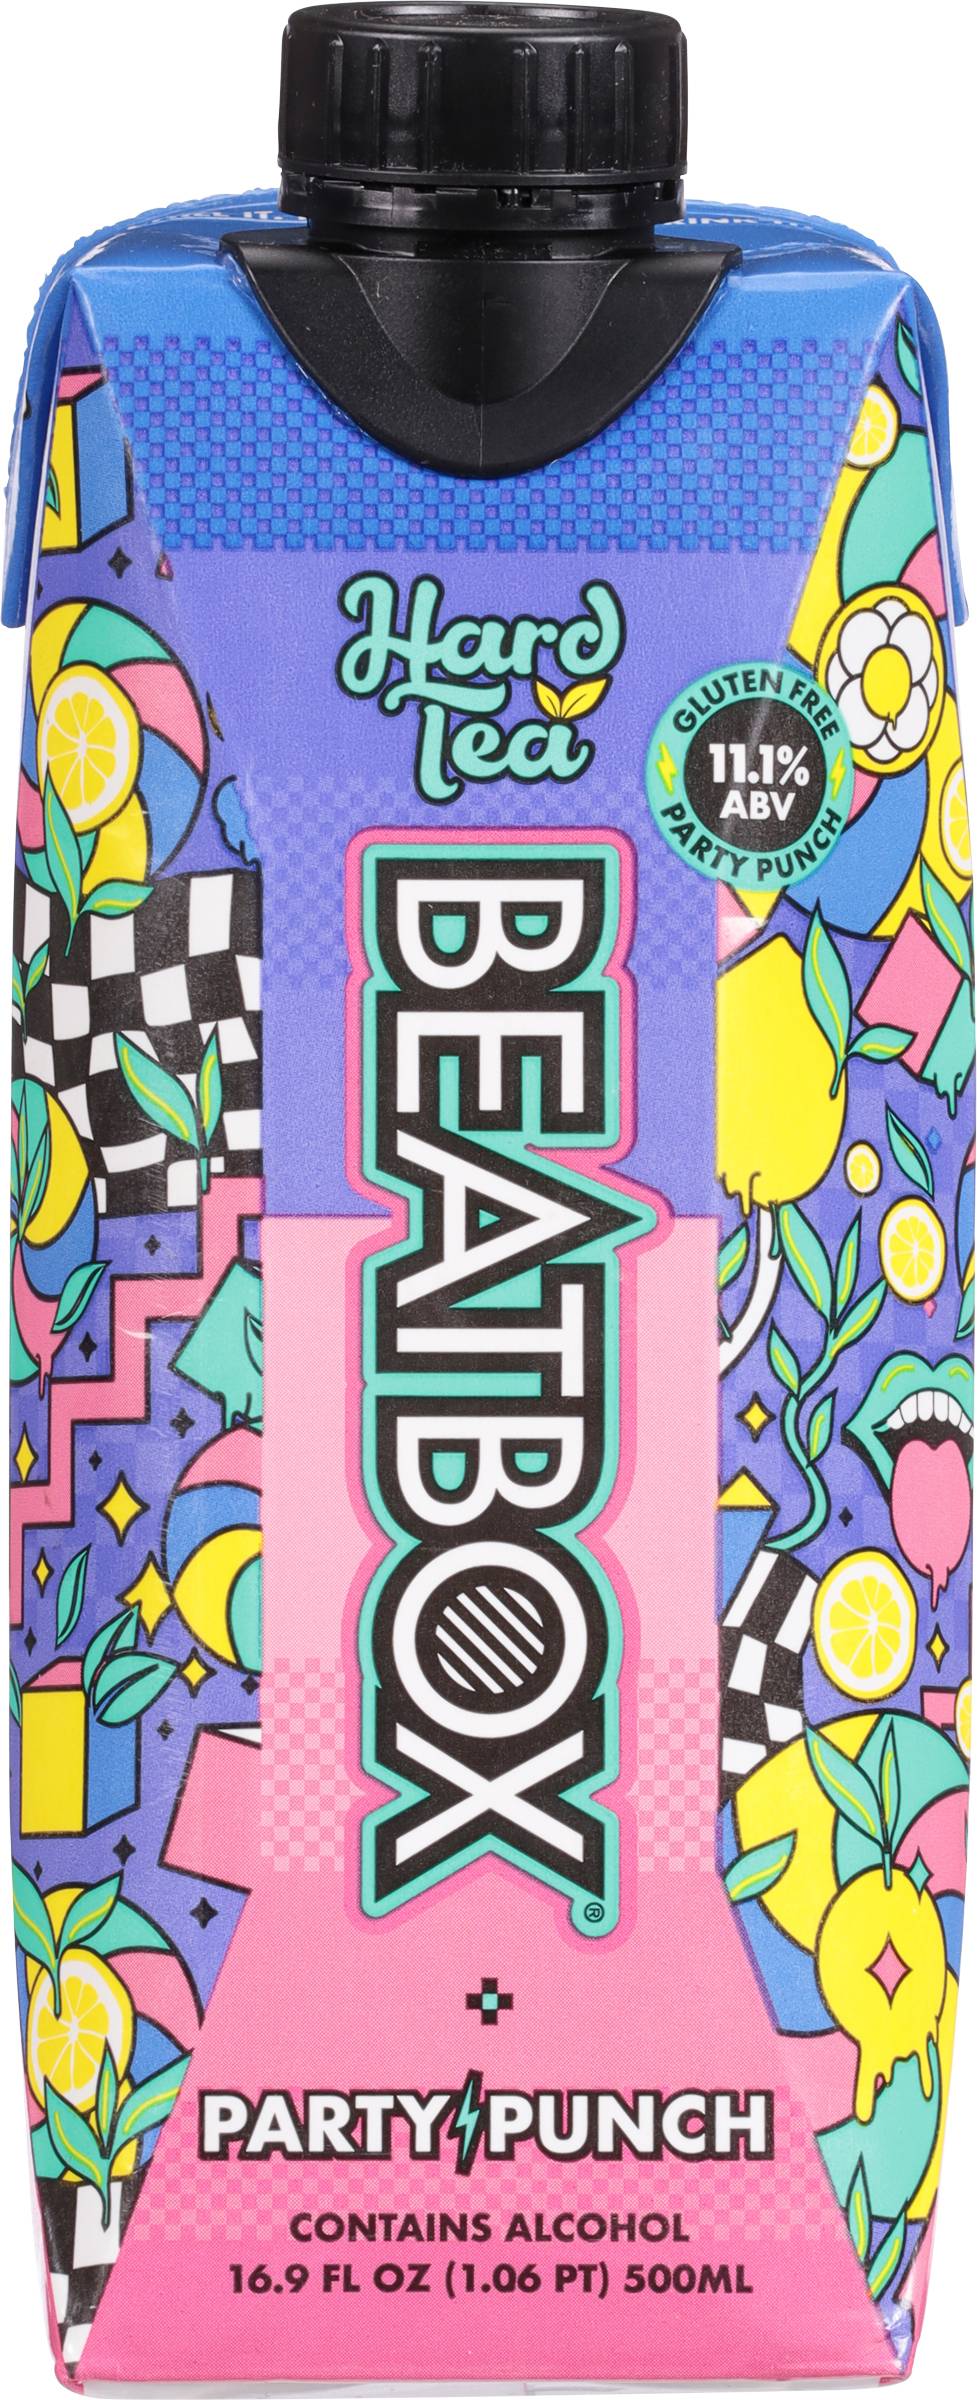 Beatbox Beverages Party Punch Hard Tea (500 ml)